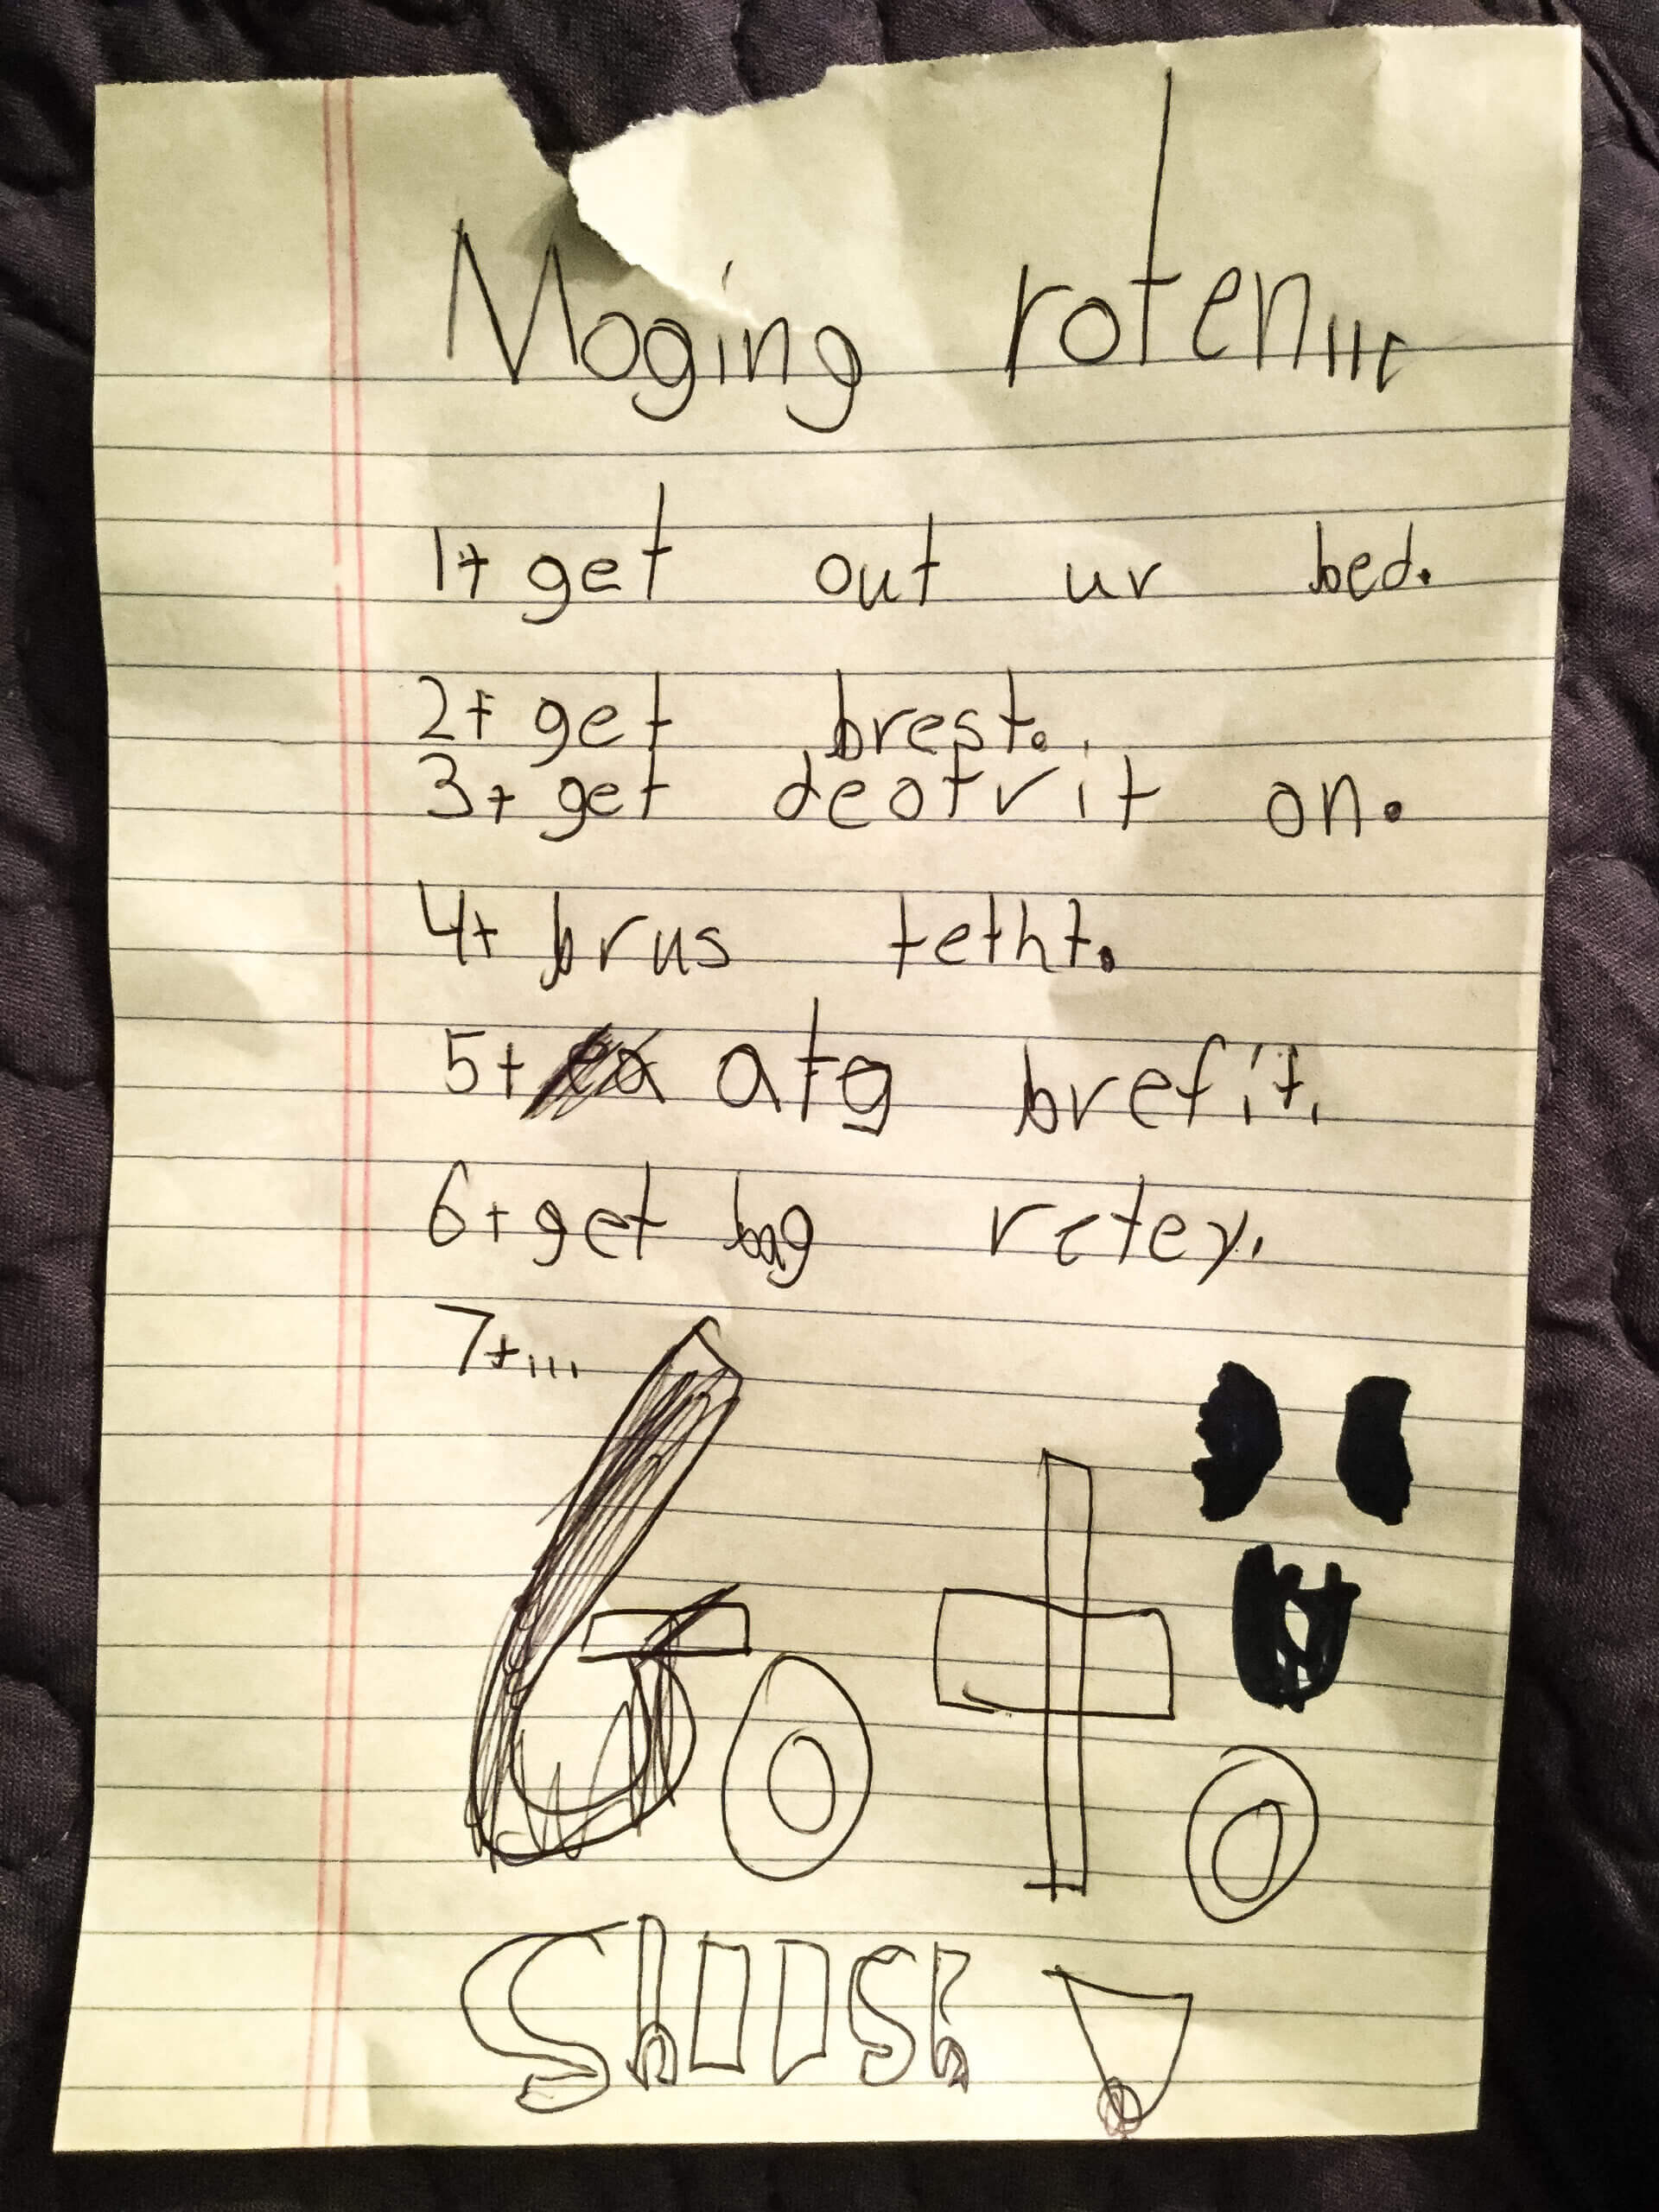 A note in children's handwriting reads as follows. Moging rotenine. 1. Get out ur bed. 2. get brest. 3. get deotrit on. 4. brus tetht. 5. at brefit. 6. get bag retey. 7. Go to shoosh.